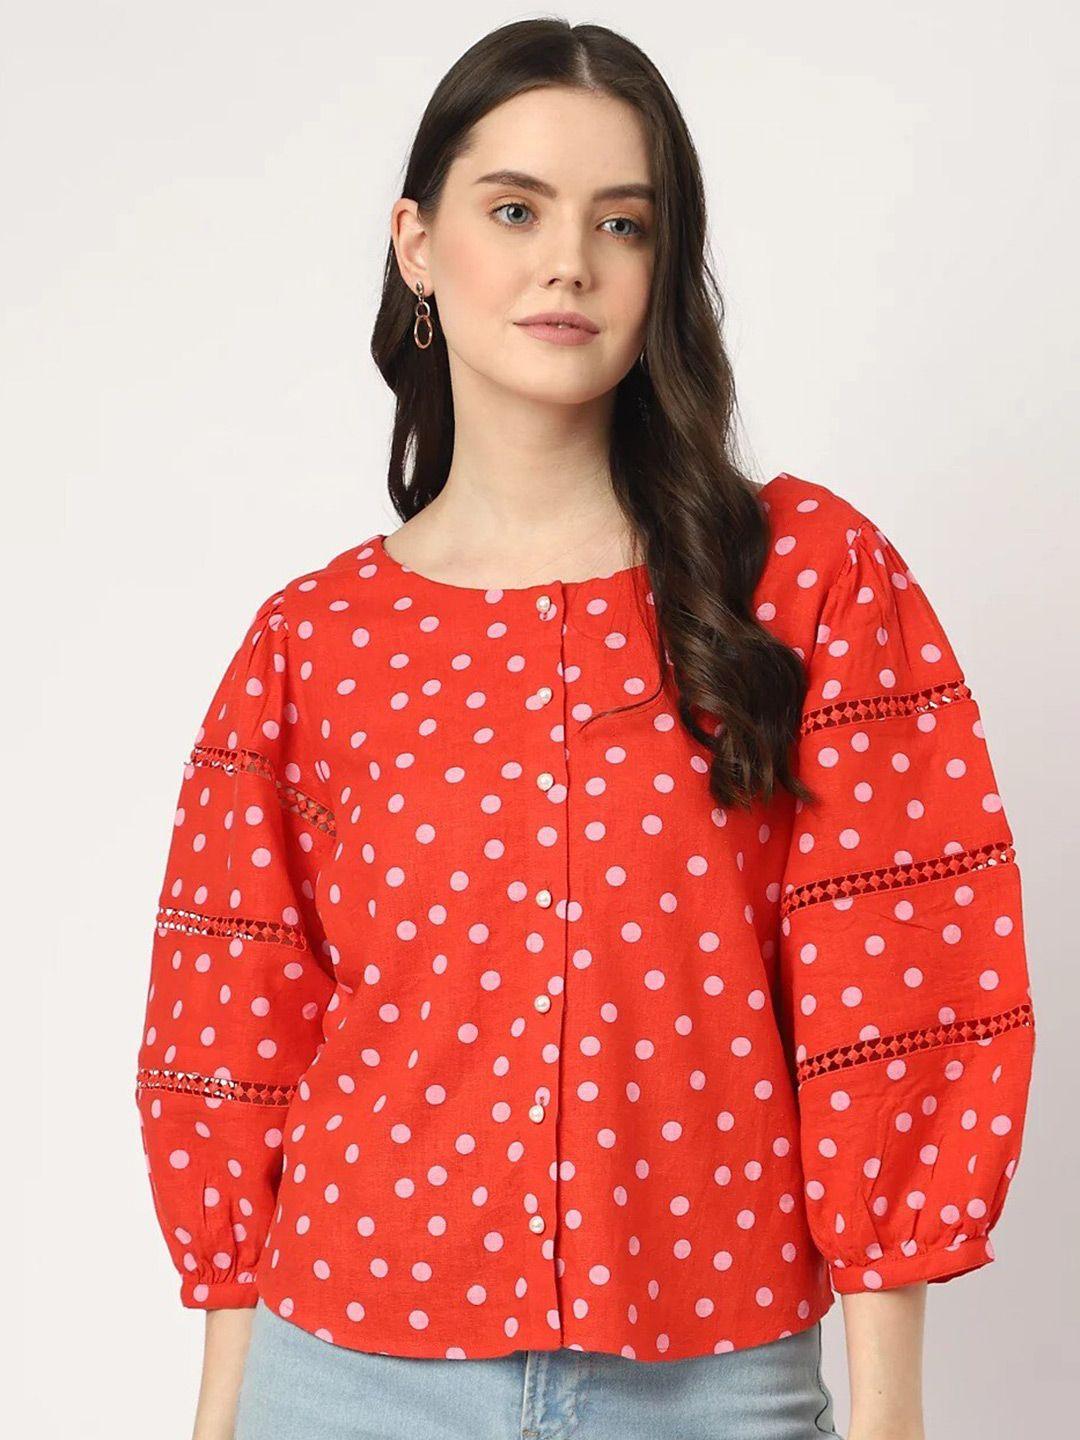 marks-&-spencer-polka-dots-printed-puff-sleeves-lace-inserts-shirt-style-top